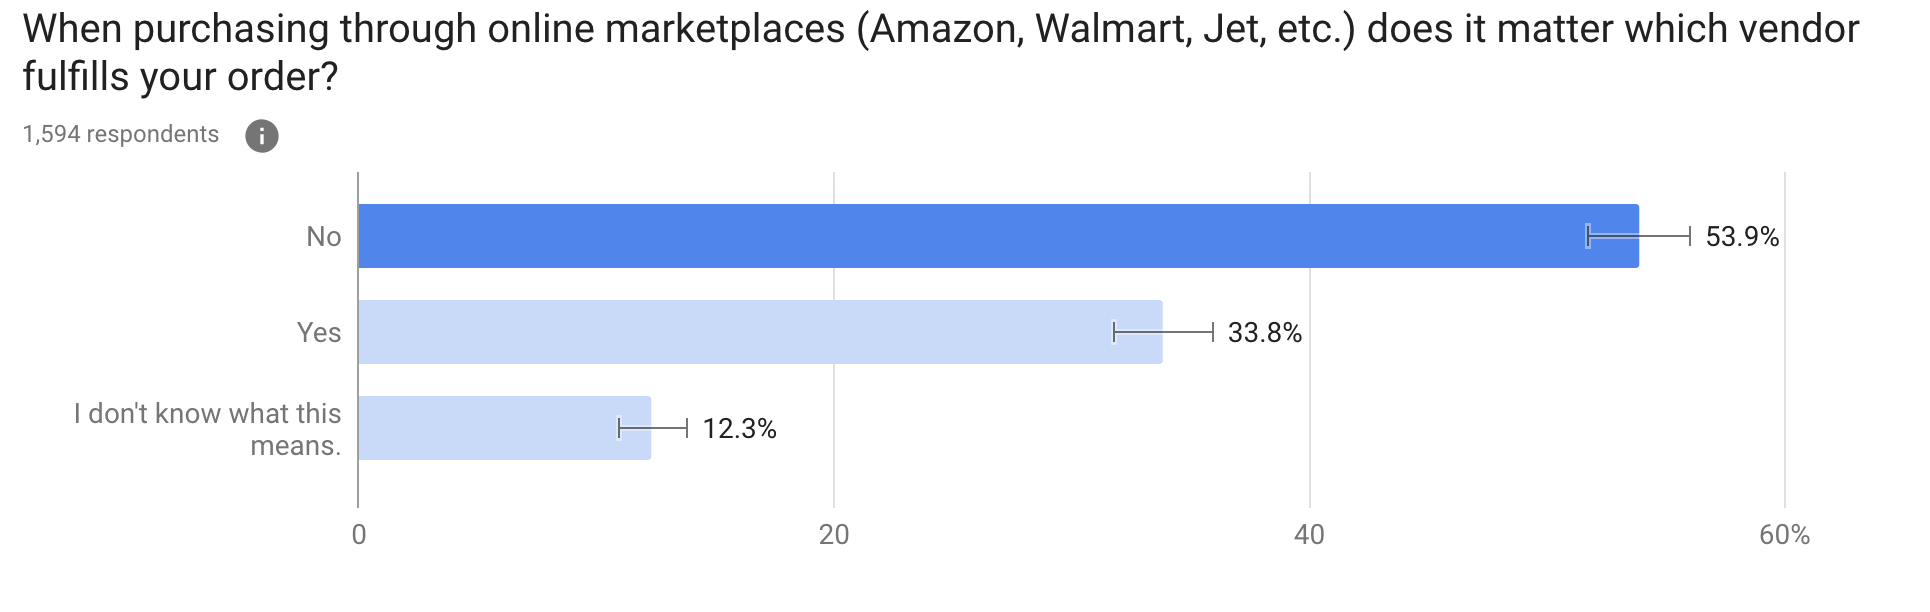 When purchasing through online marketplaces (Amazon, Walmart, Jet, etc.) does it matter which vendor fulfills your order?